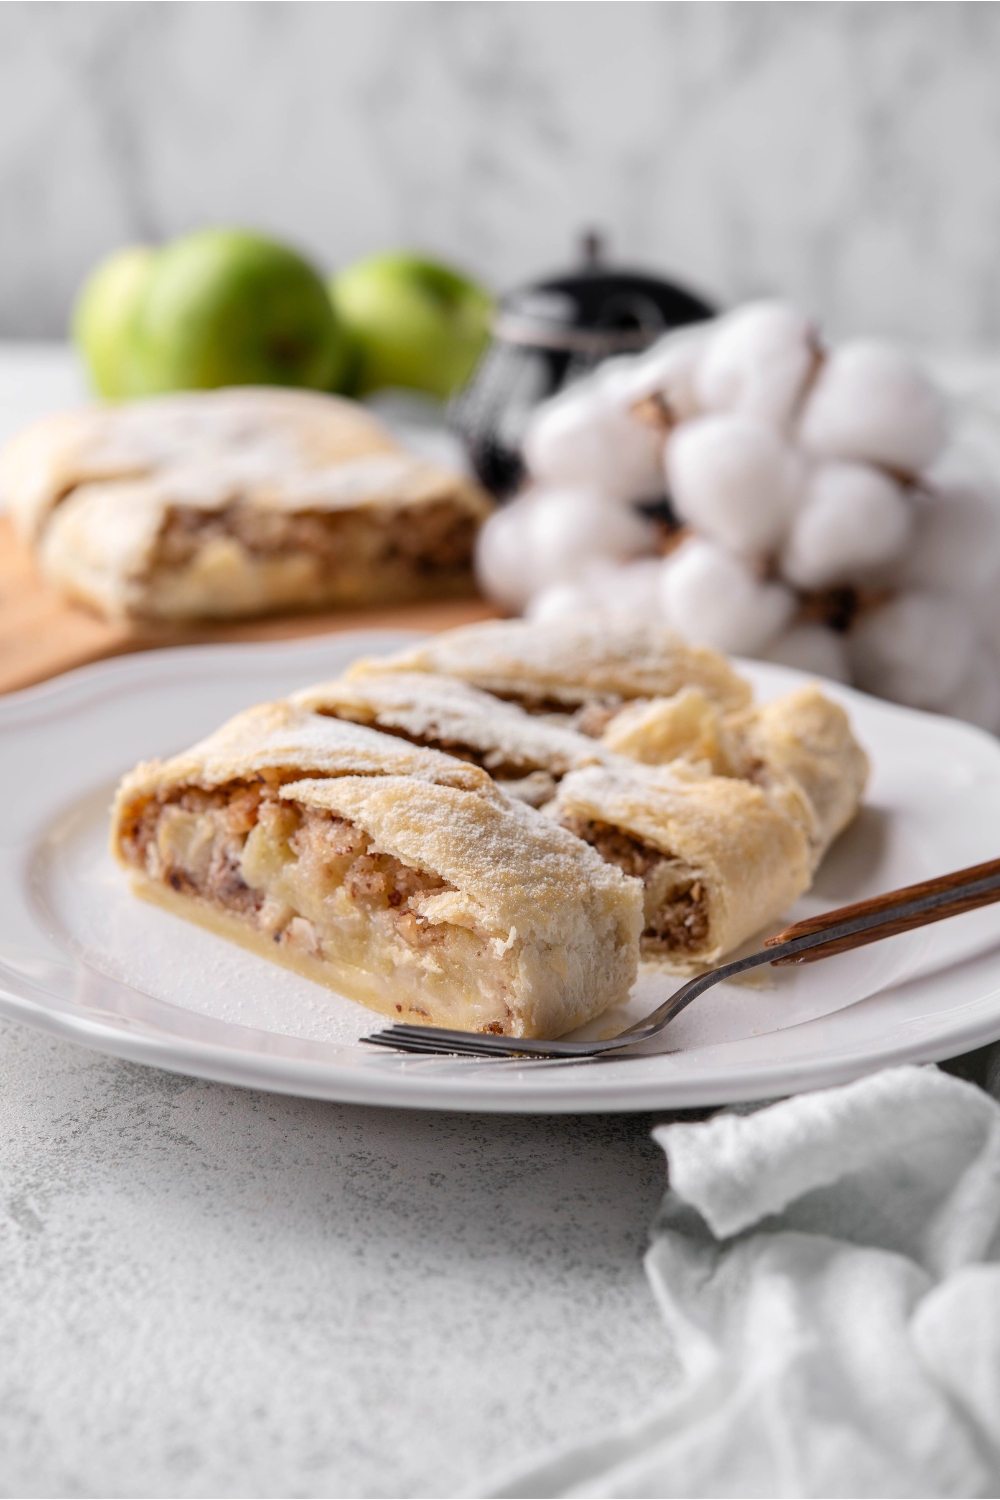 Puff pastry apple strudel sliced into three portions and served on a plate with a fork.